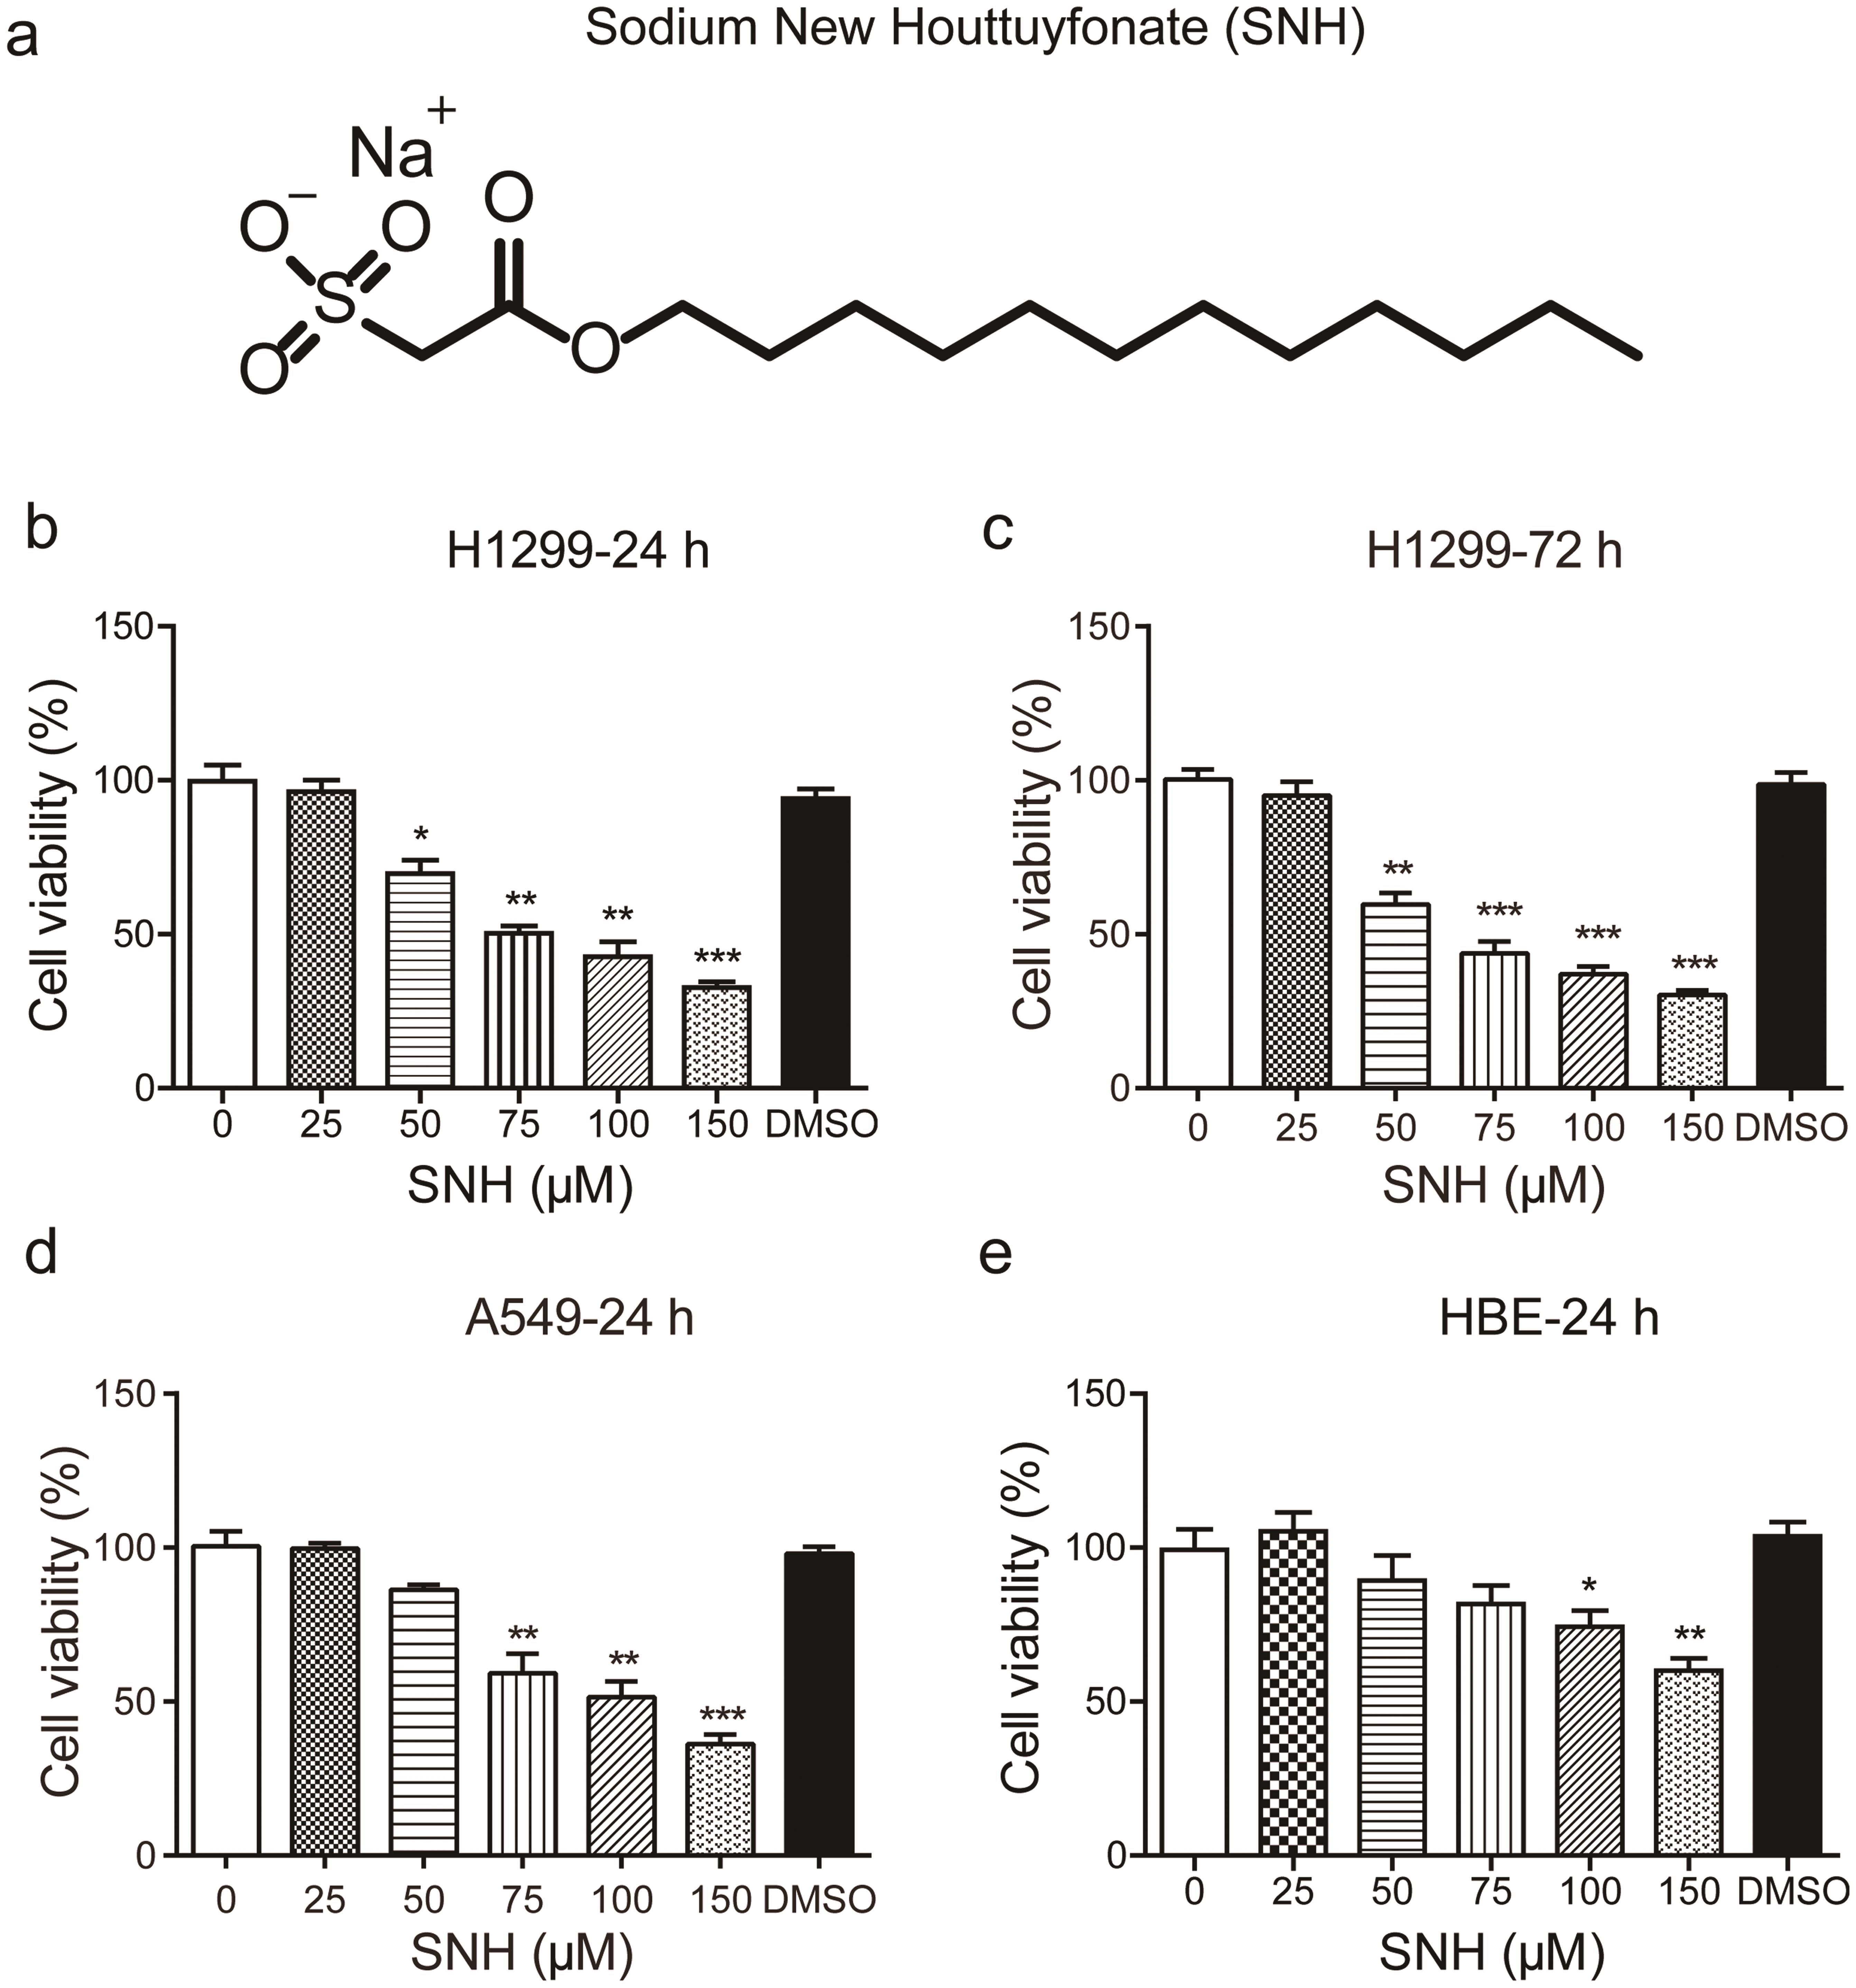 SNH inhibits the proliferation of lung adenocarcinoma H1299 cells: (a) structure of SNH; (b) H1299 cells were treated with various concentrations of SNH (0, 25, 50, 75, 100, or 150 µM) for 24 h; (c) 72 h; (d and e) A549 and HBE cells were treated with various concentrations of SNH (0, 25, 50, 75, 100, or 150 µM) for 24 h.